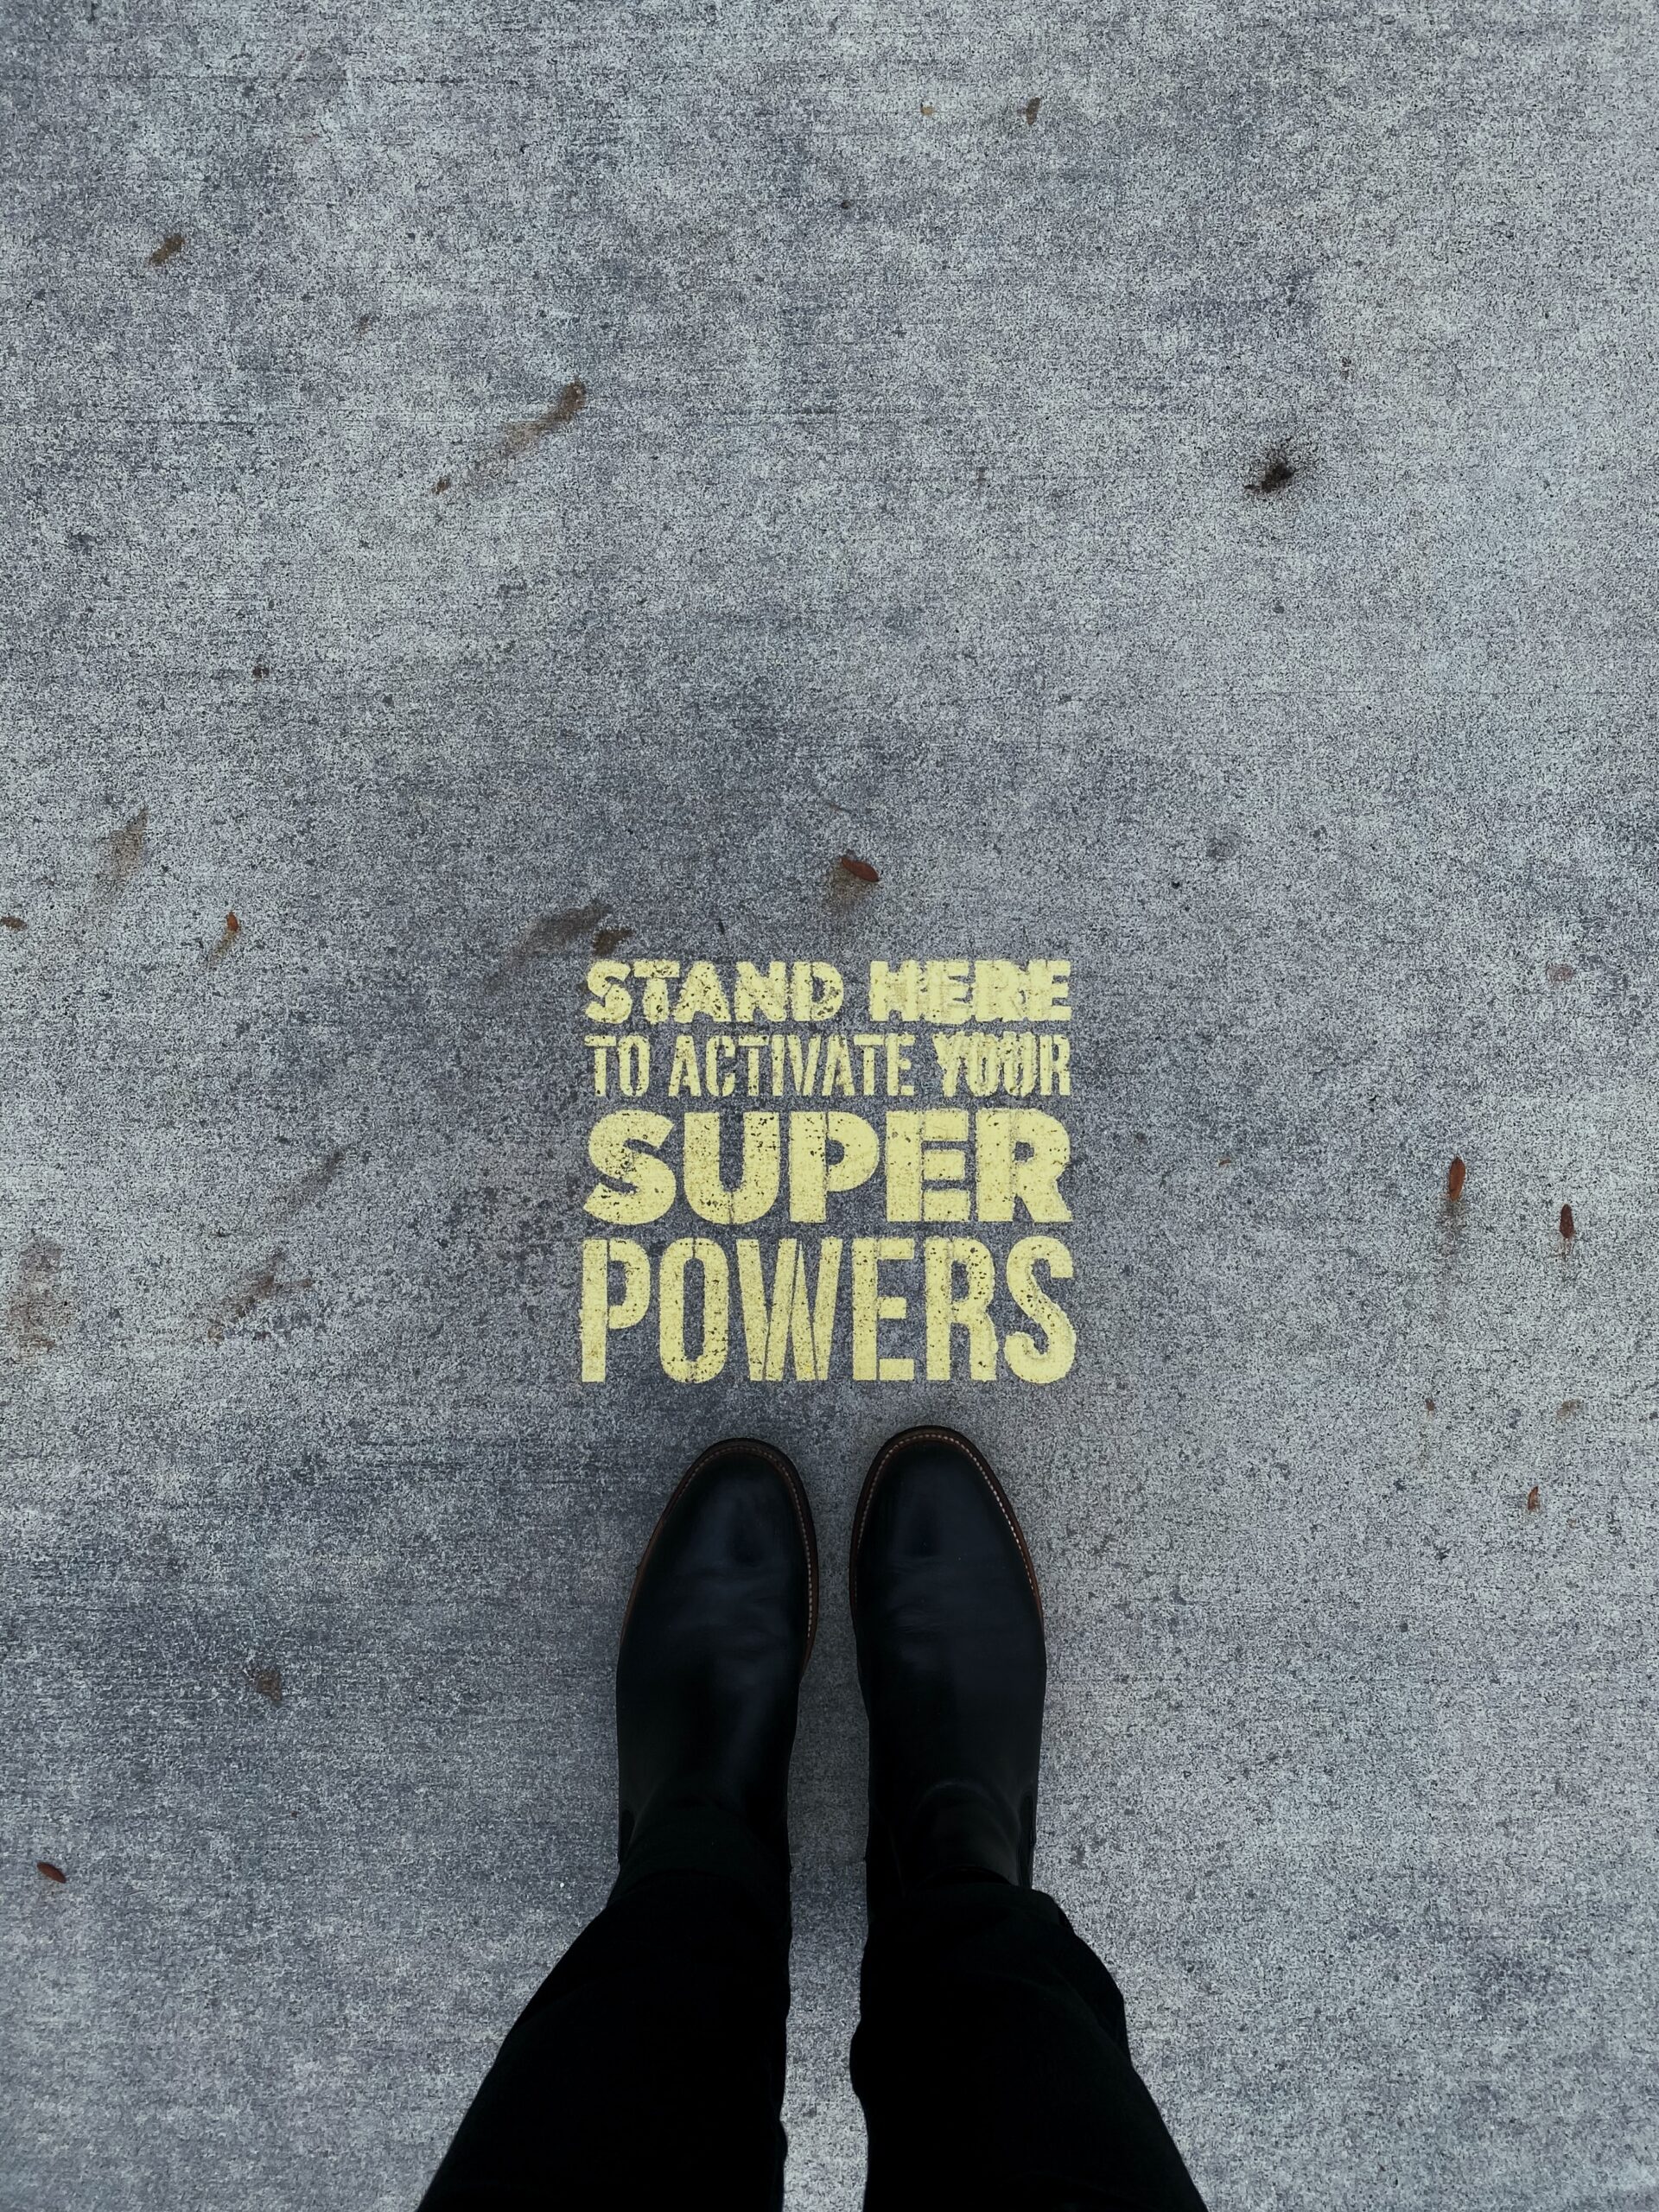 stand up to activate with super powers - events